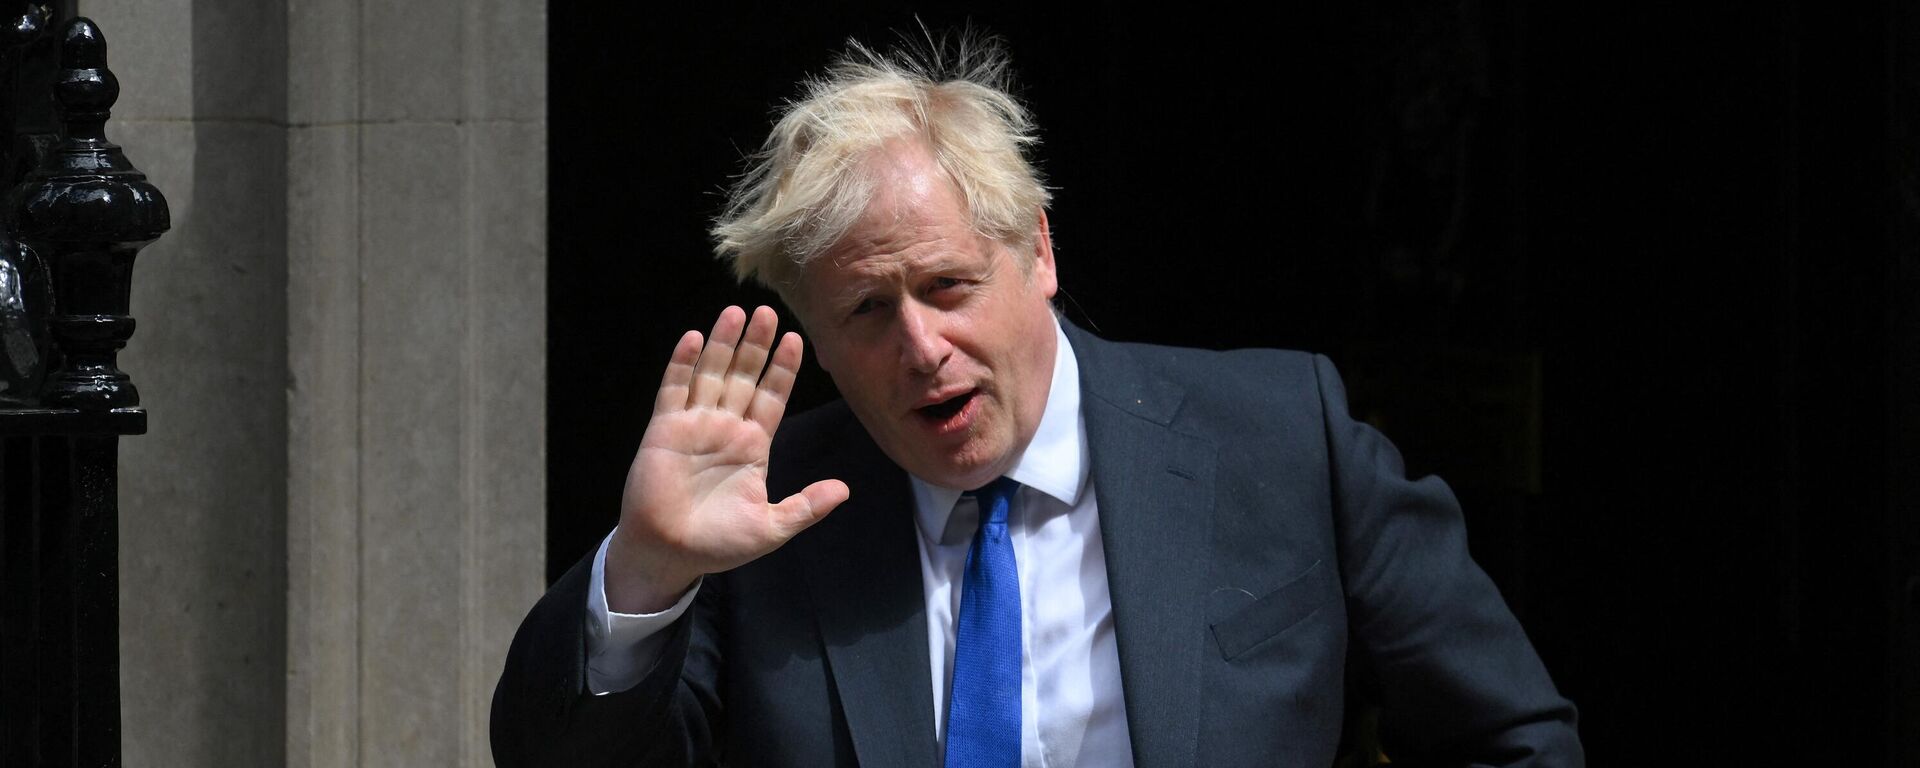 Britain's Prime Minister Boris Johnson leaves from 10 Downing Street in central London on July 6, 2022 to head to the Houses of Parliament for the weekly Prime Minister's Questions (PMQs) session - Sputnik International, 1920, 07.07.2022